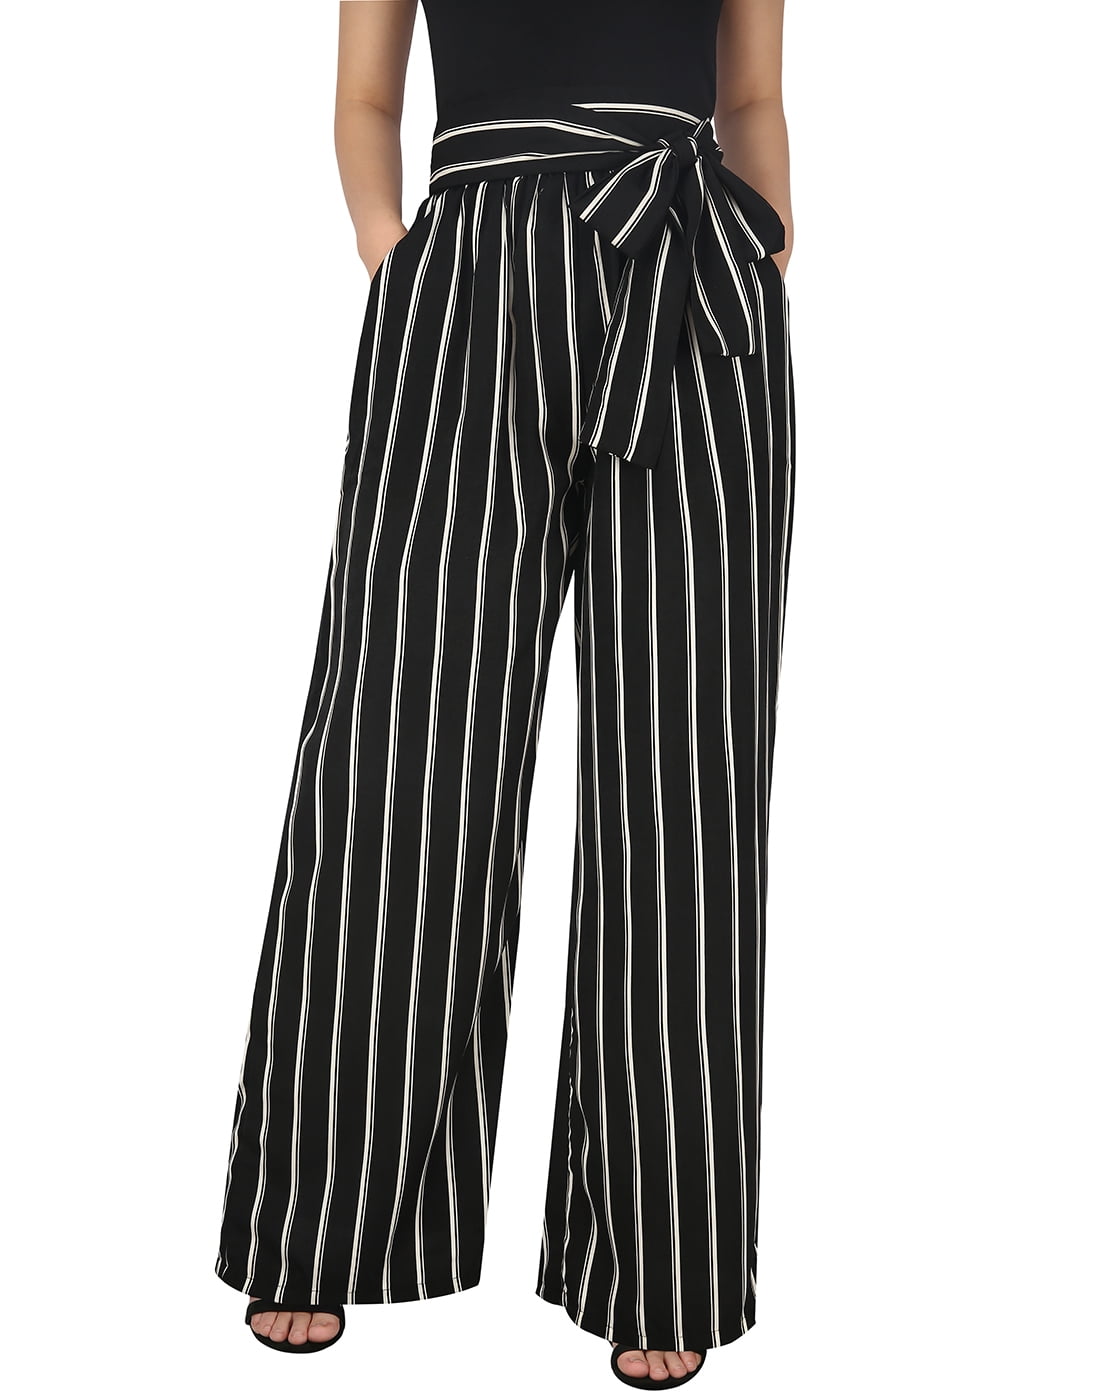 HDE - HDE Womens High Waisted Pants Wide Leg Palazzo Pant Trousers with ...